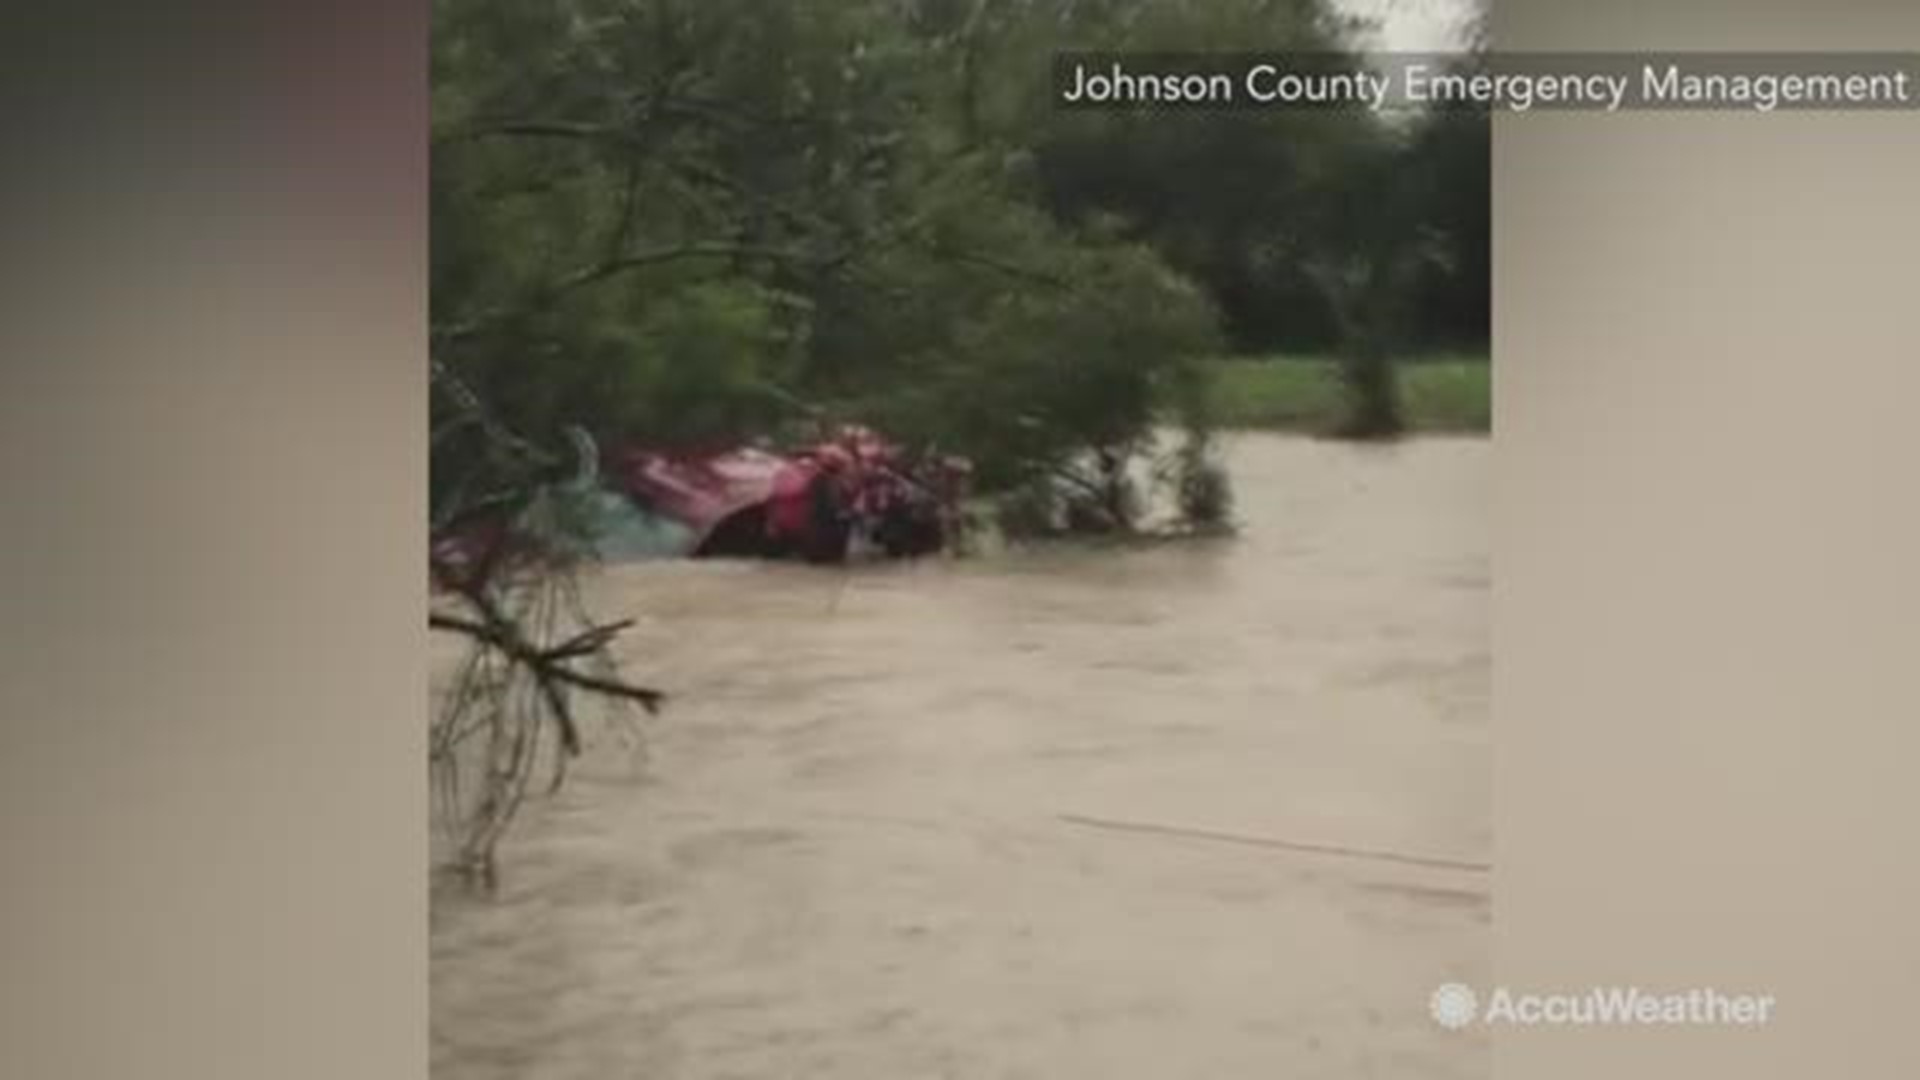 Emergency management officials in Johnson County, Texas, said fire crews rescued a person from the roof of a car that was submerged by floodwaters on Monday, October 15.